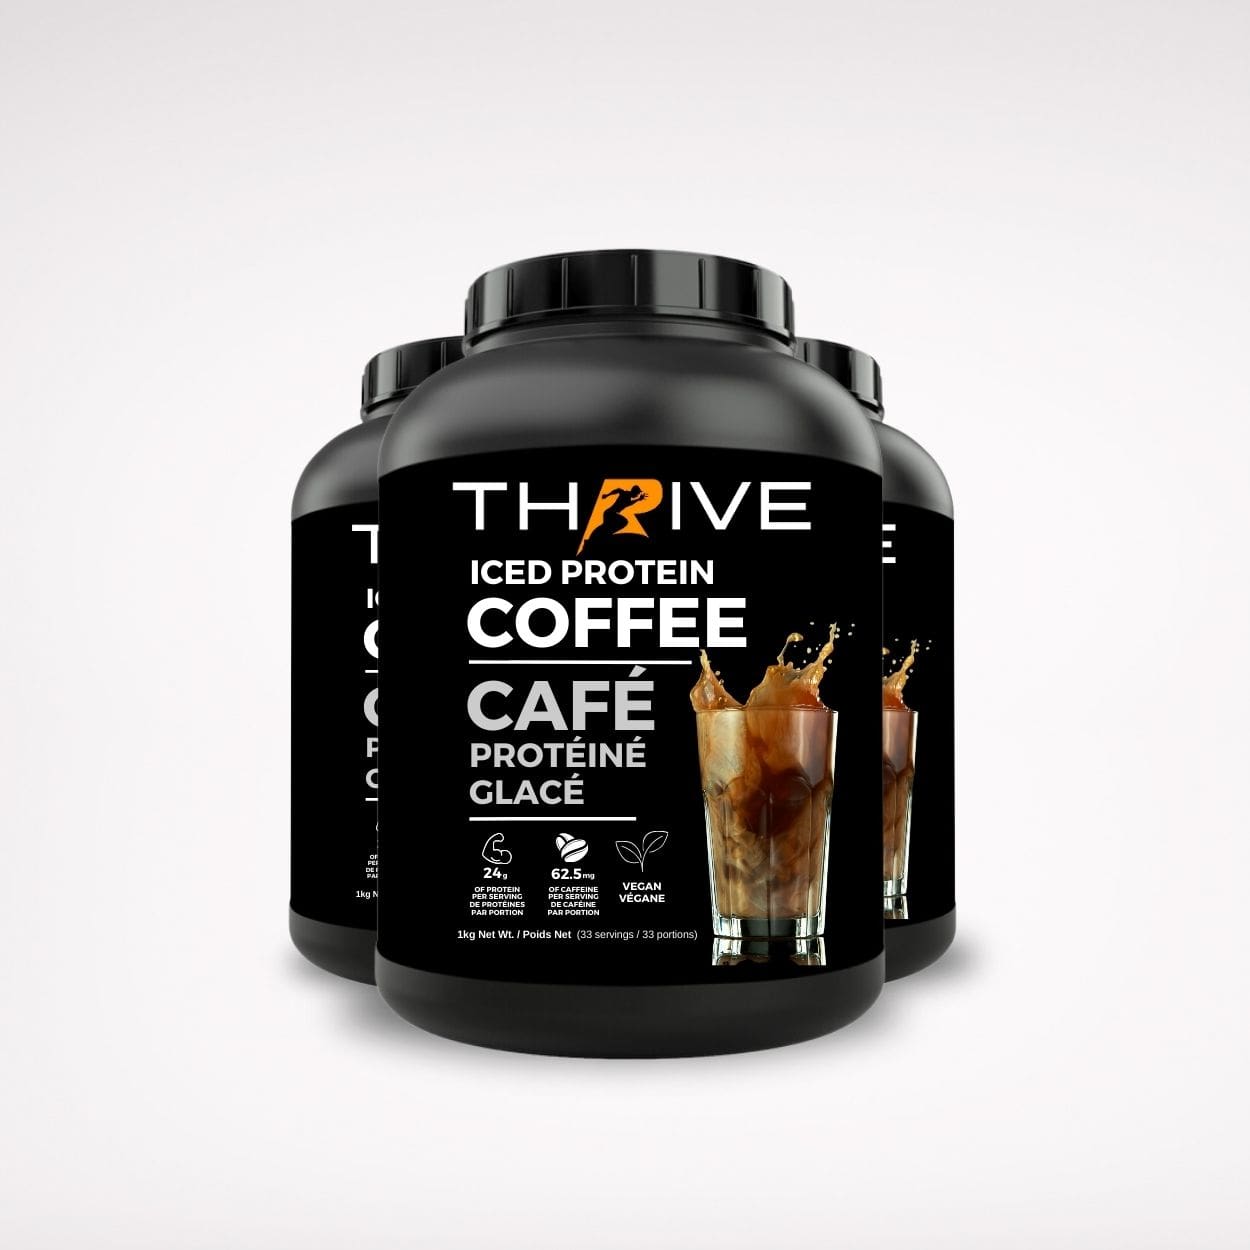 Thrive Iced Protein Coffee (99 servings)